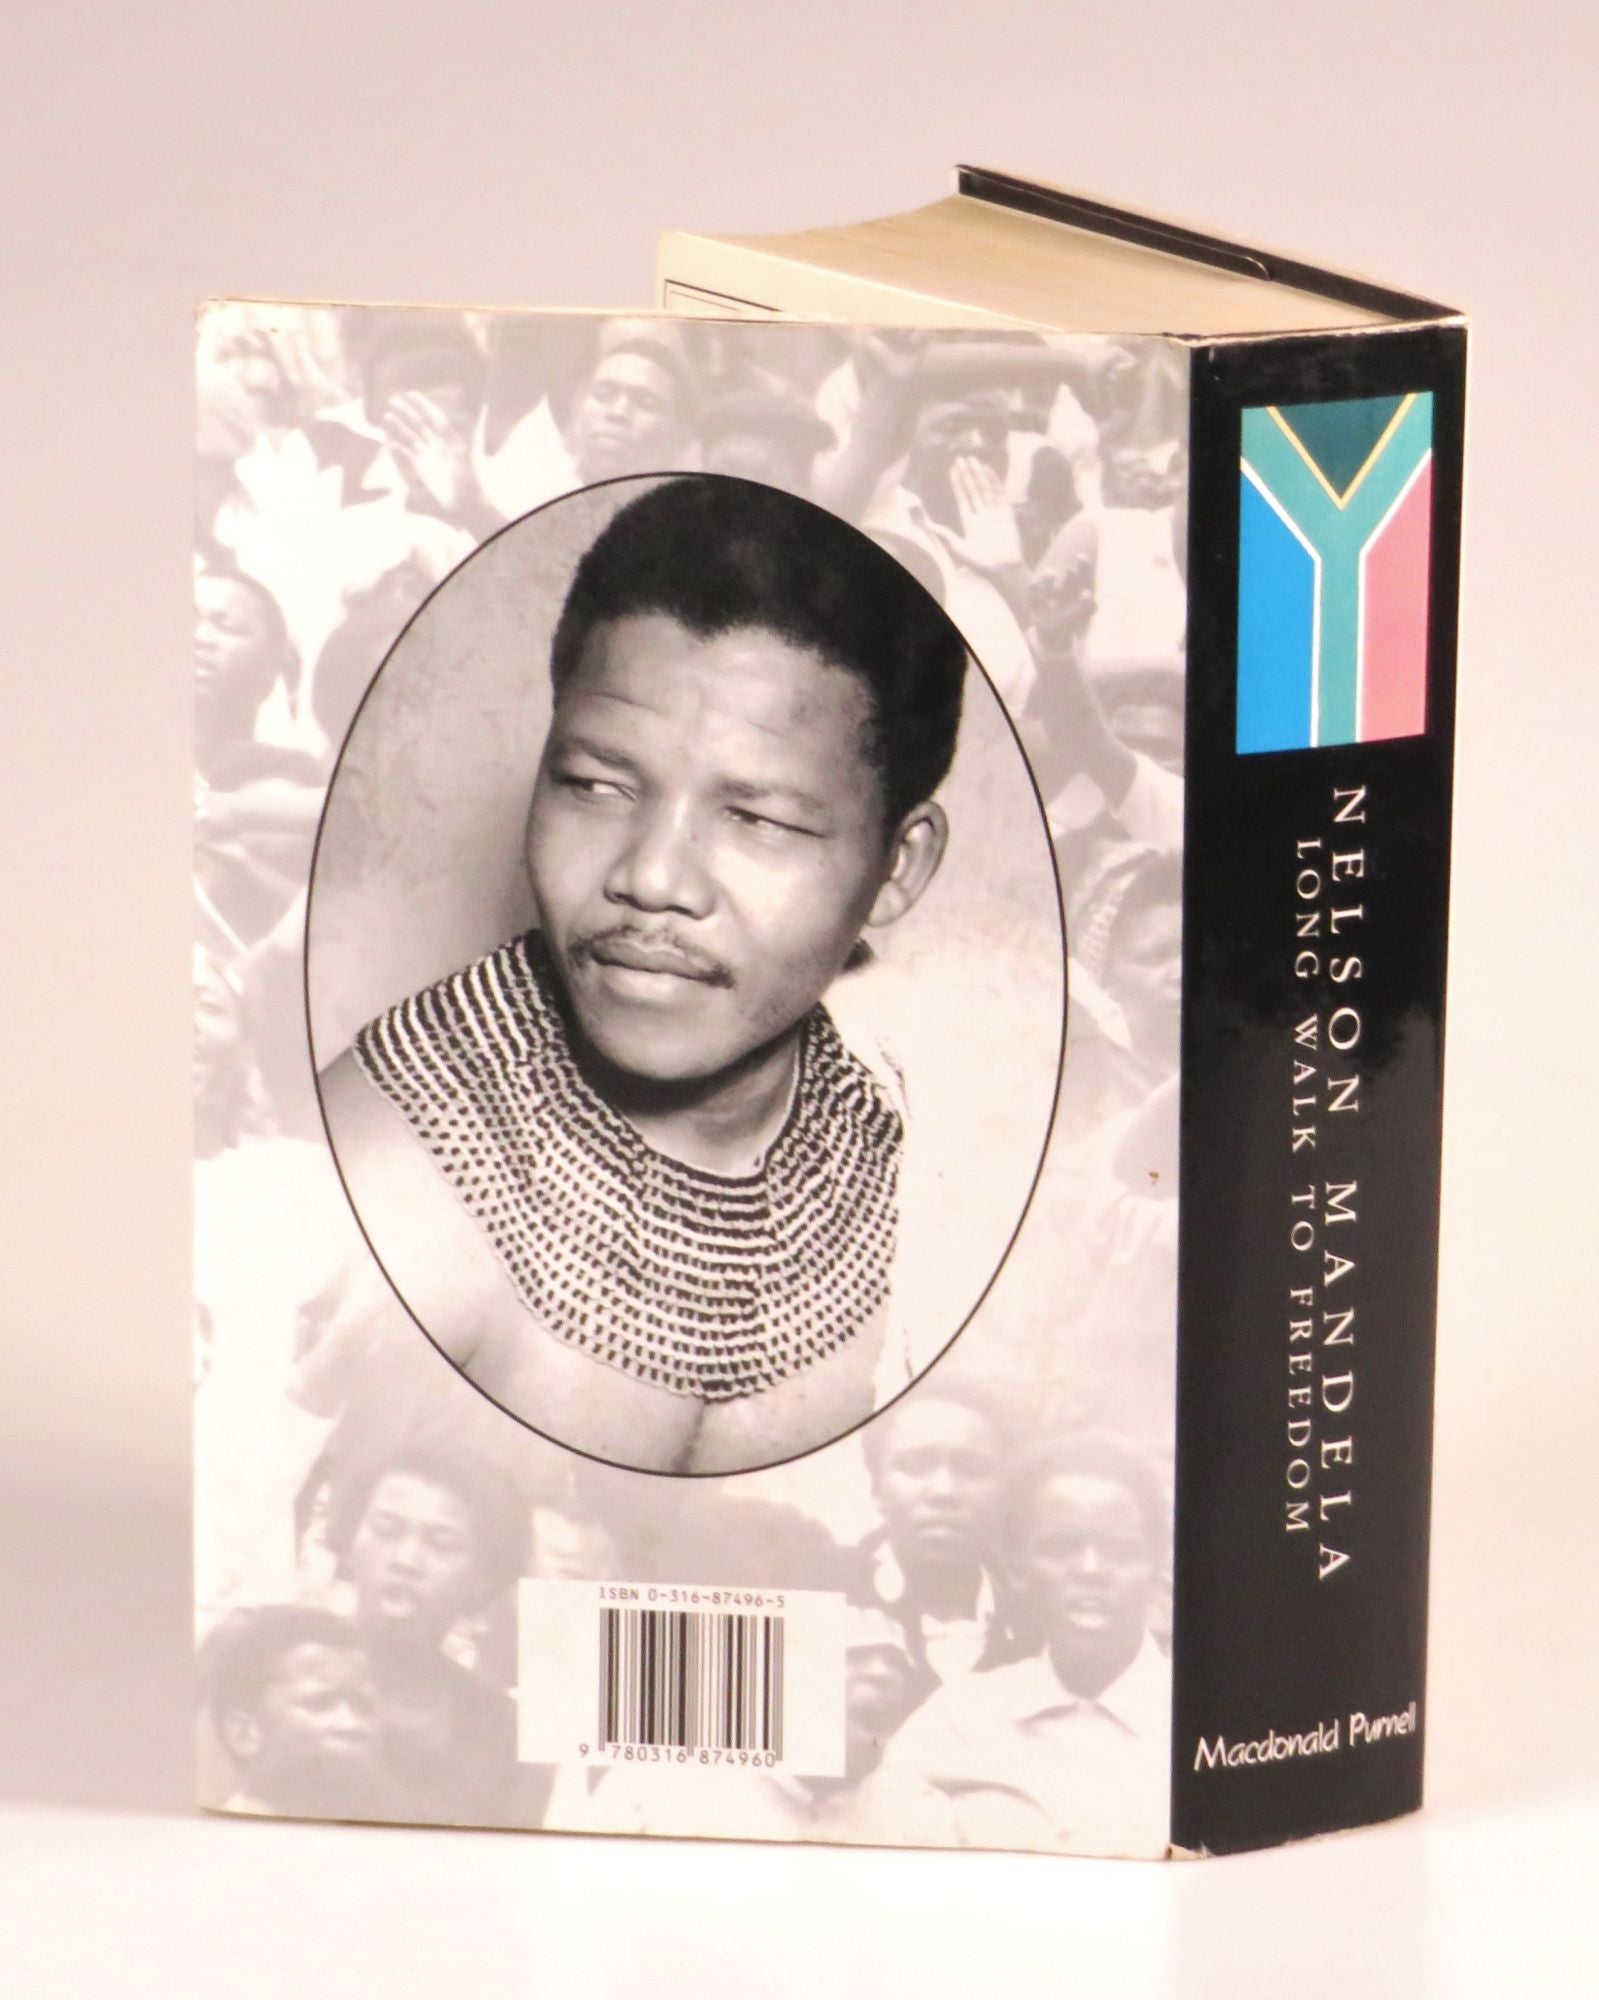 Long Walk to Freedom, the South African first edition, inscribed